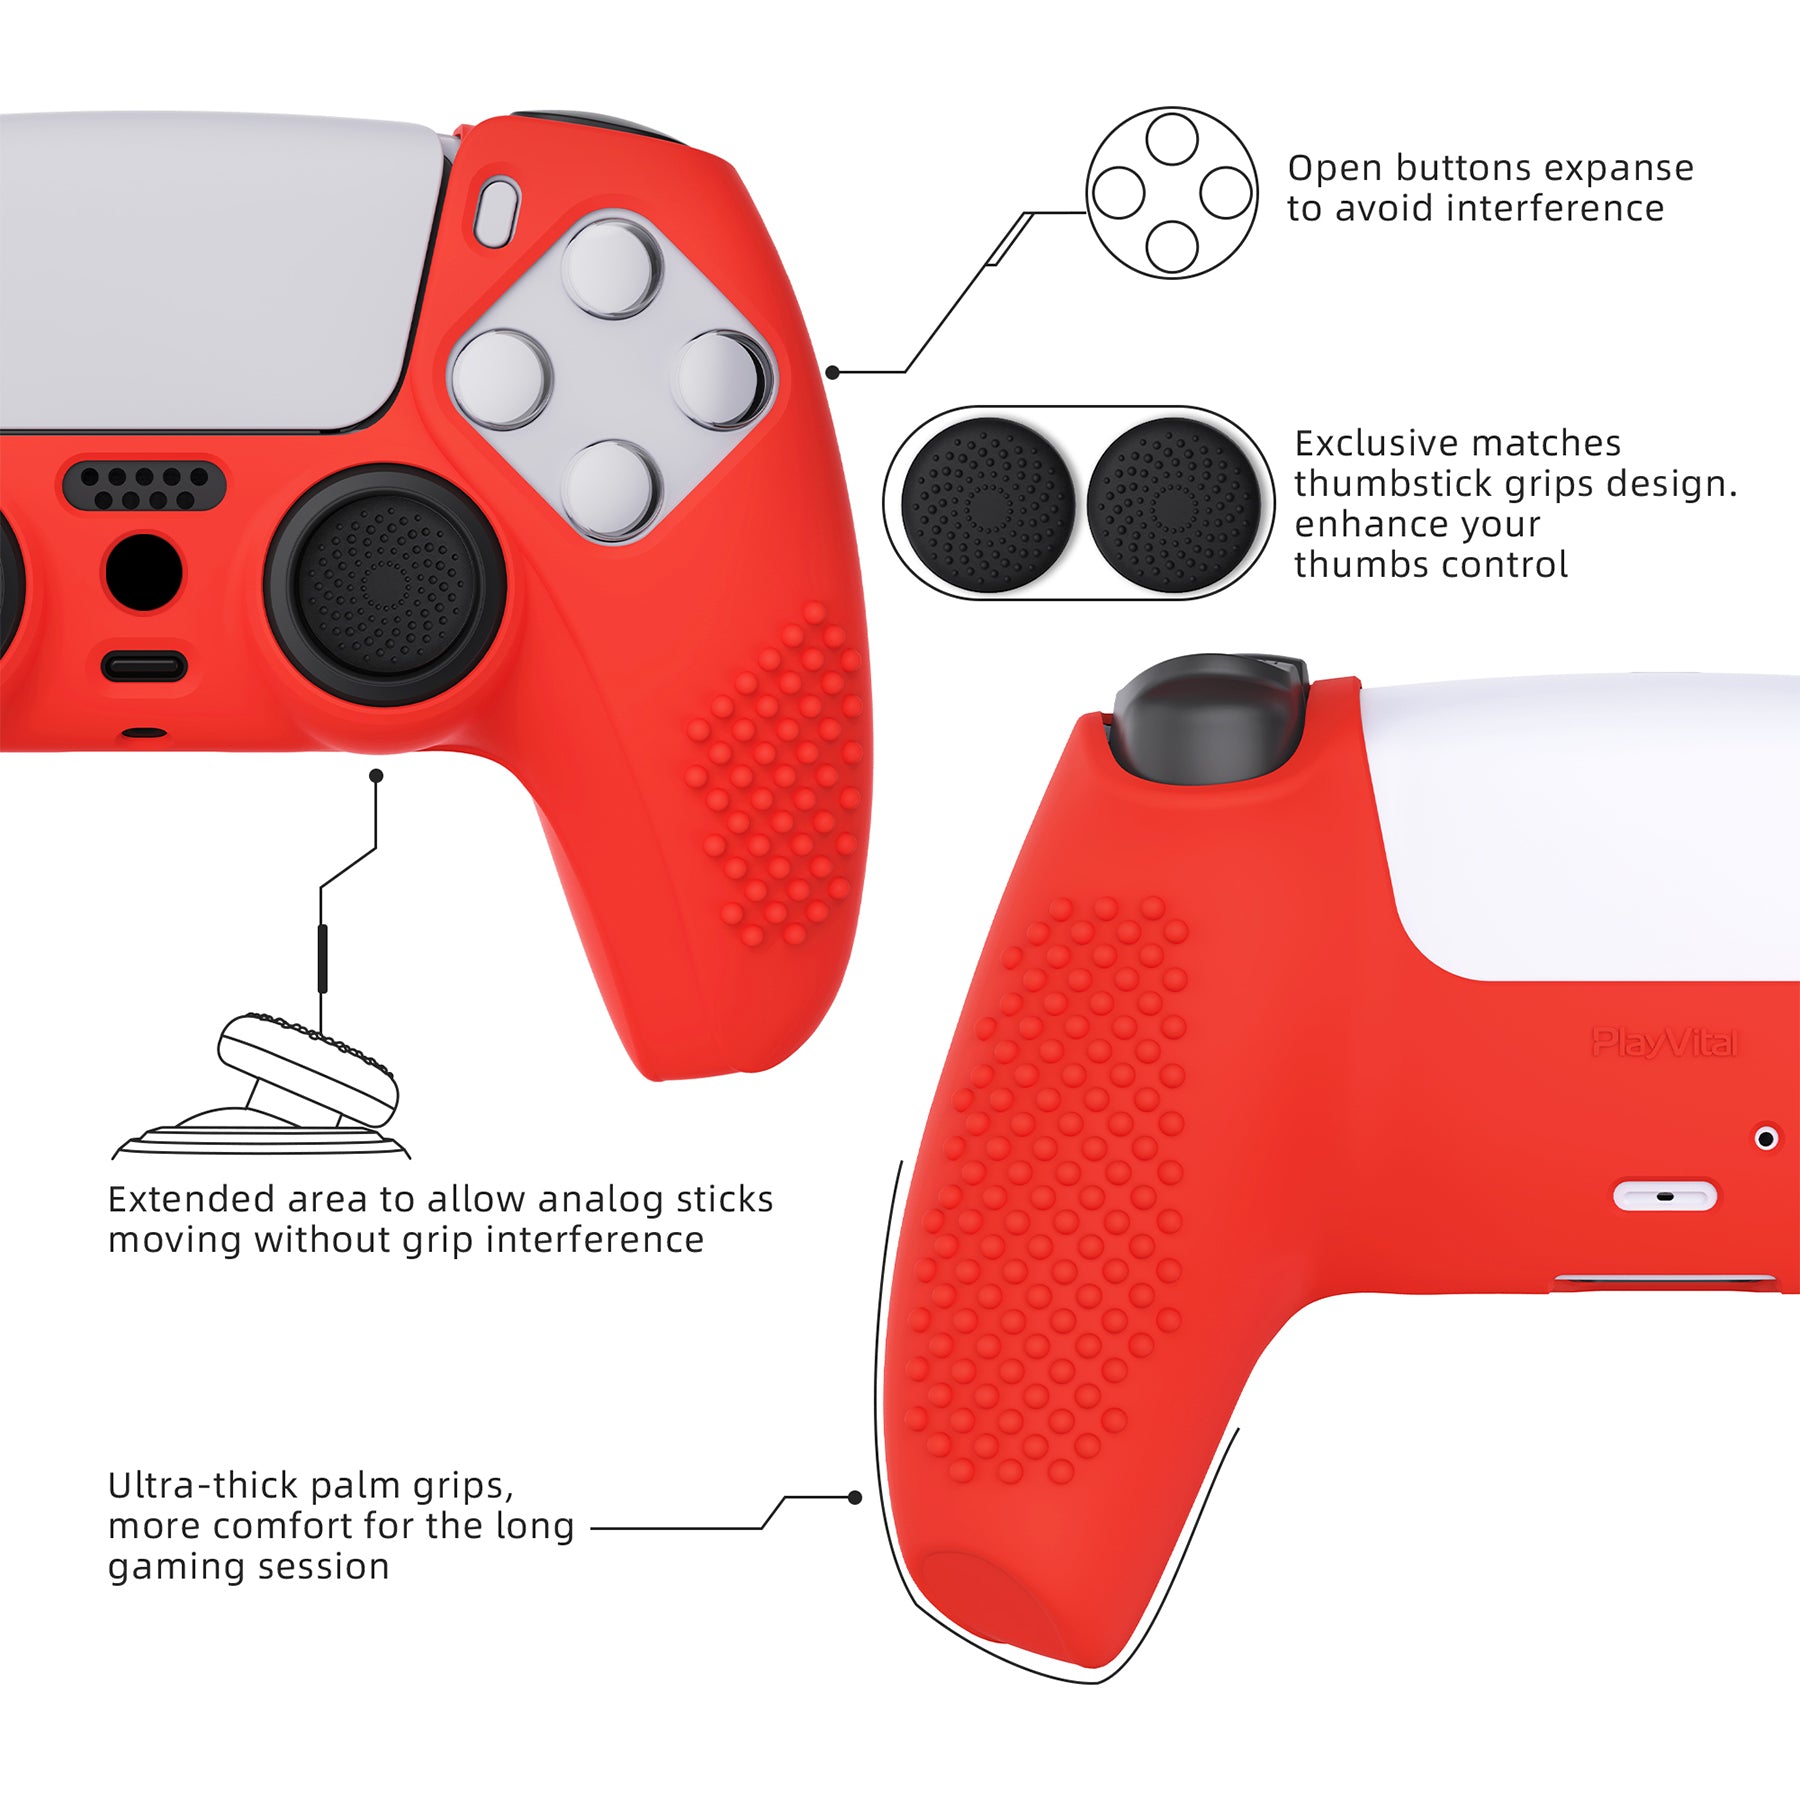 PlayVital 3D Studded Edition Anti-Slip Silicone Cover Skin with Thumb Grip Caps for PS5 Wireless Controller - Passion red - TDPF014 PlayVital